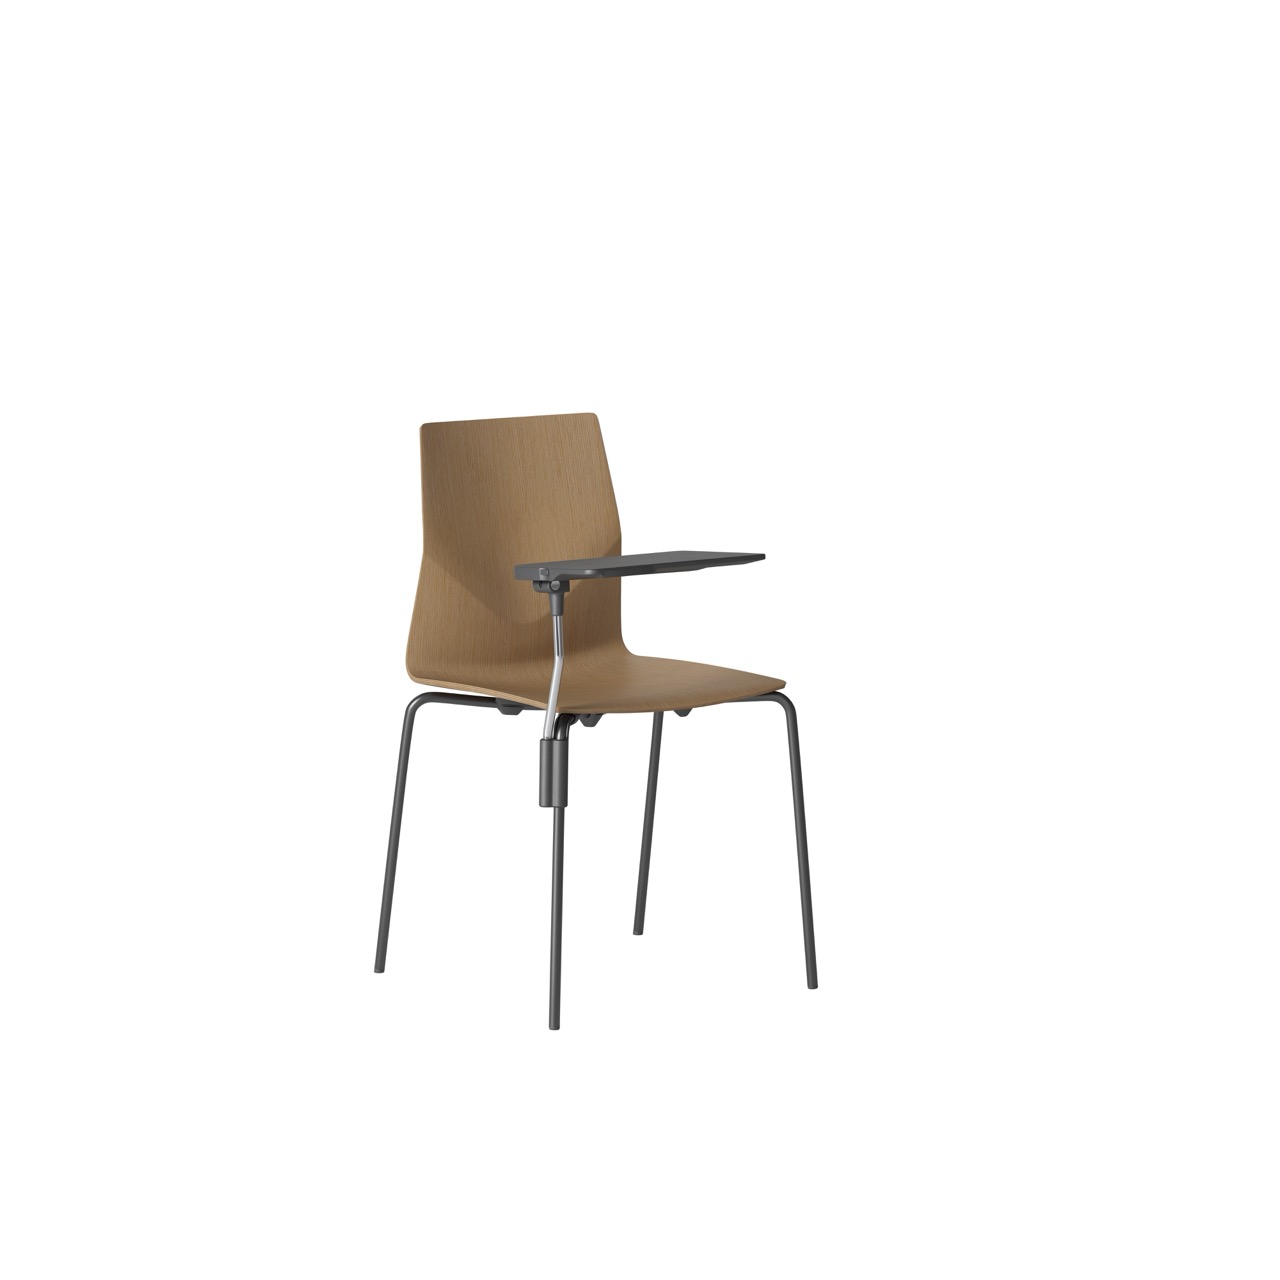 OCEE&FOUR – Chairs – FourCast 2 Four – Veneer shell - Inno Note - Packshot Image 4 Large